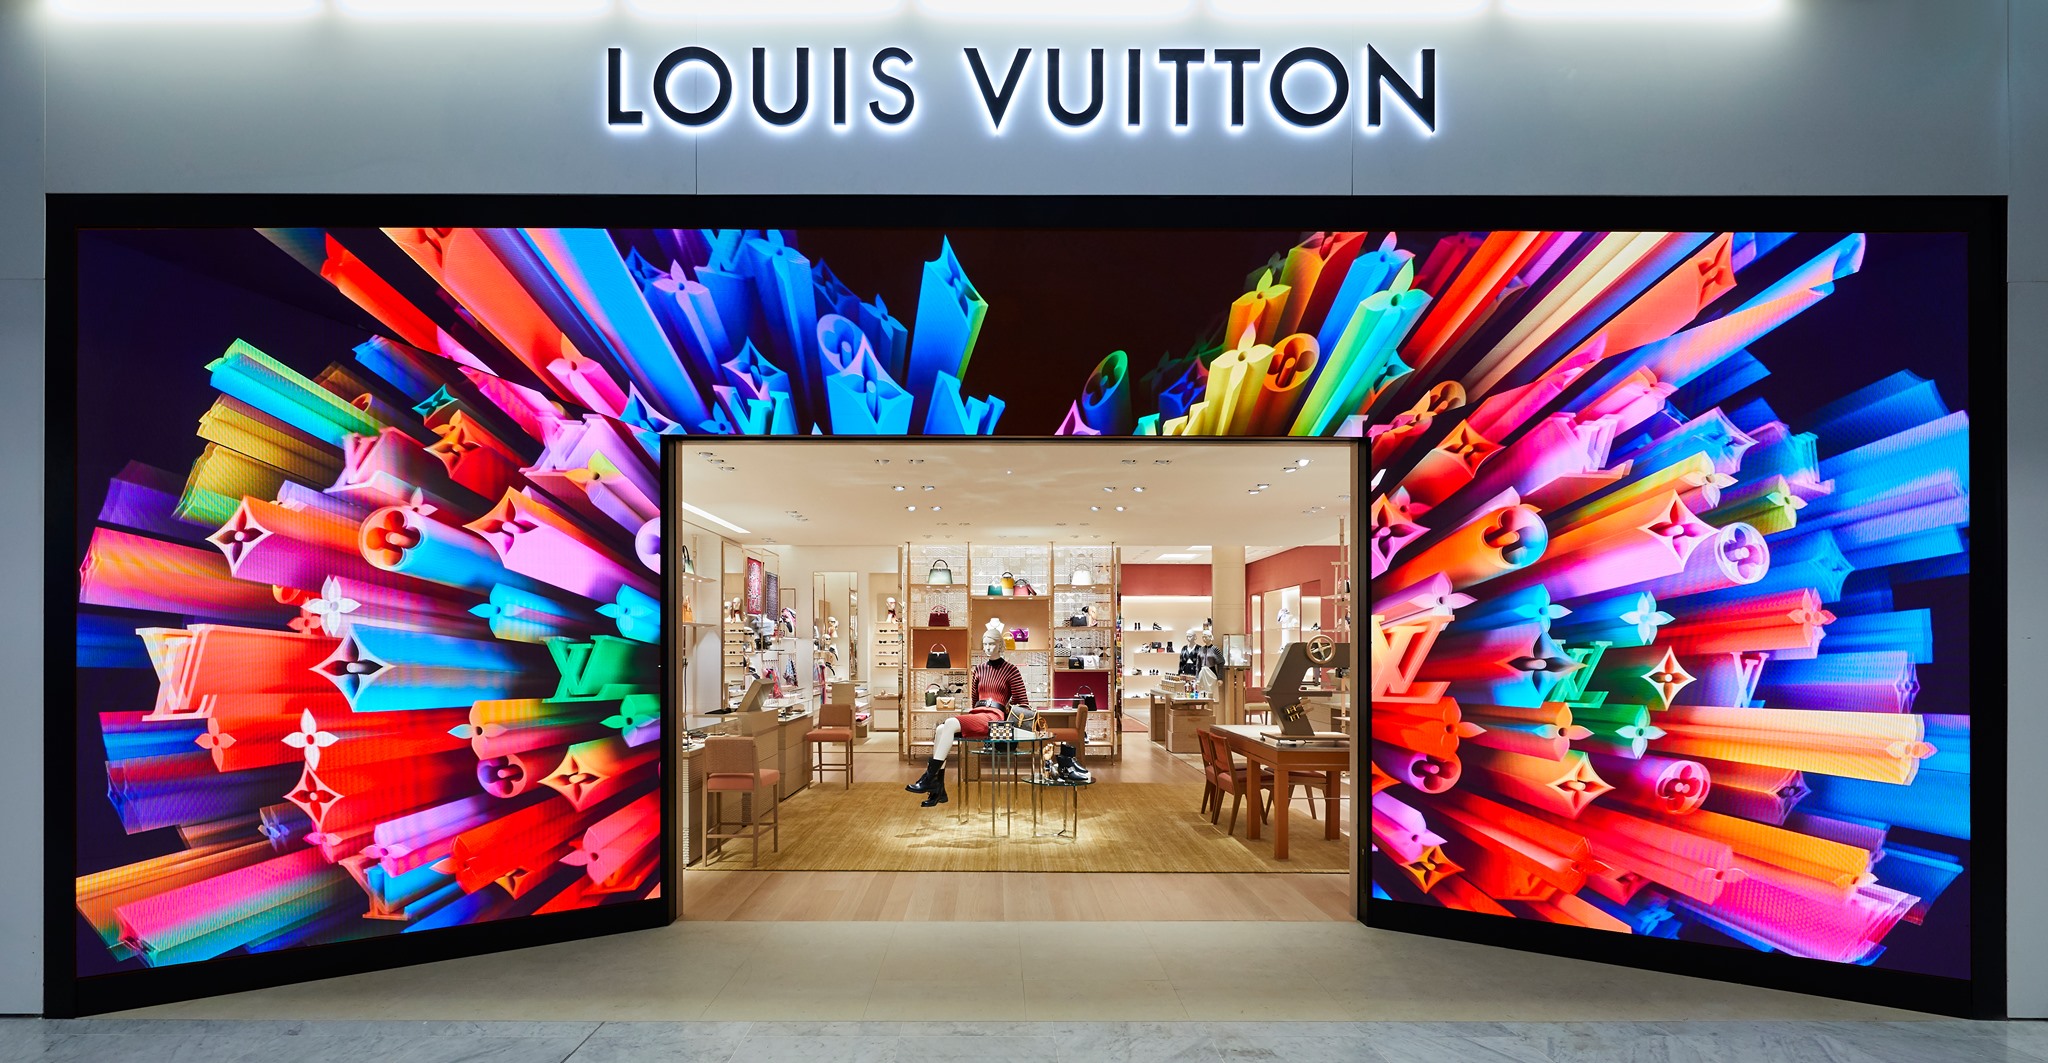 Louis Vuitton Union Square - Handbags & Packs, Luggage, Shoes - Phone  Number - Hours - Photos - 233 Geary Street - SF Station